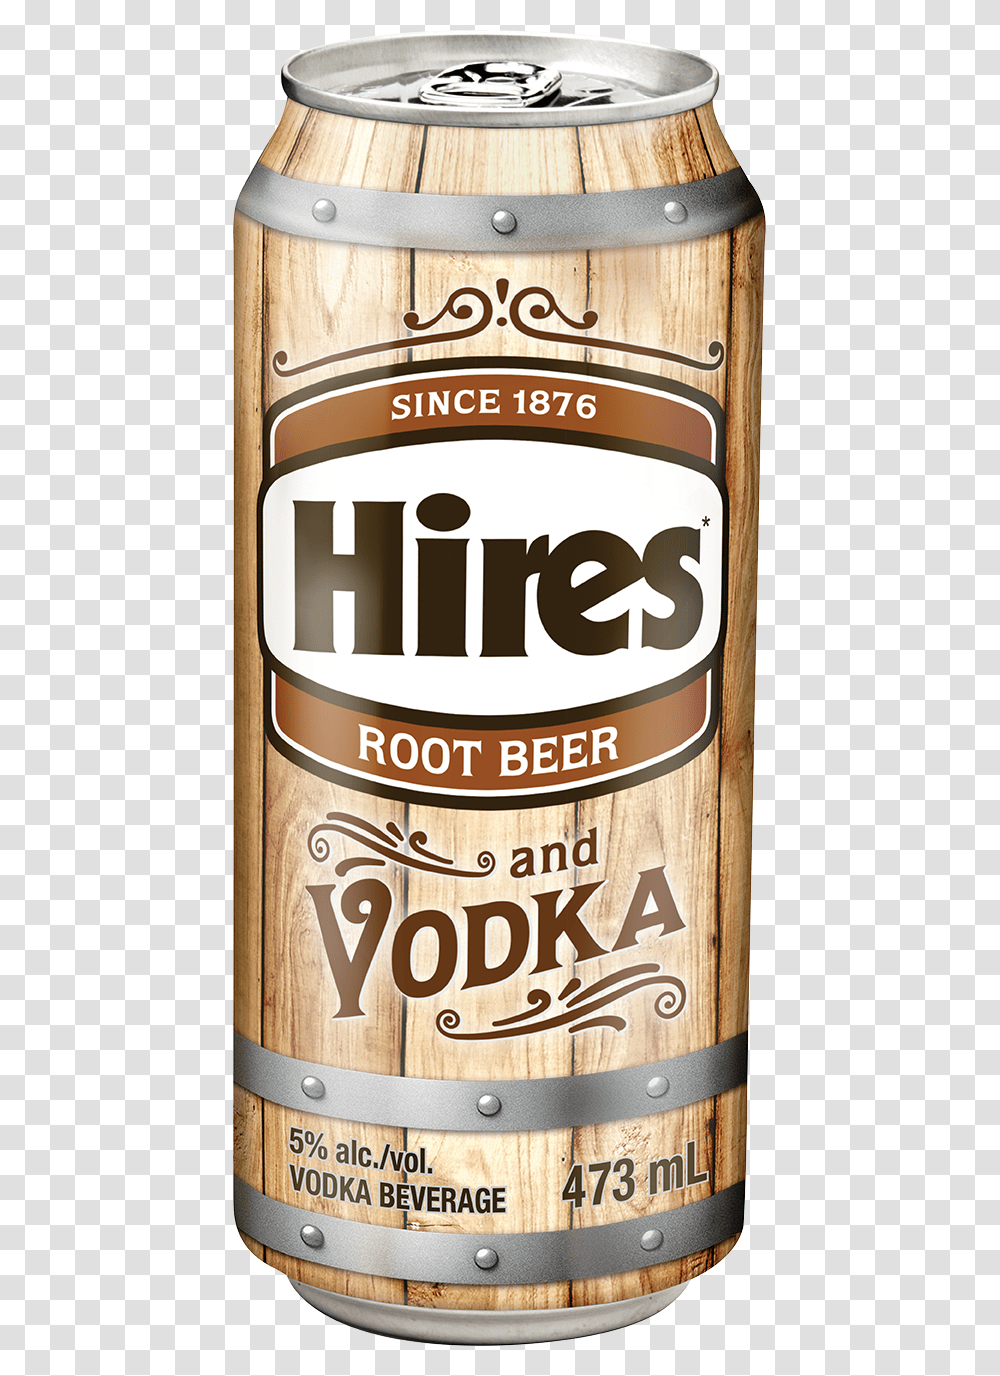 Root Beer Hires Root Beer Vodka, Beverage, Alcohol, Tin, Can Transparent Png